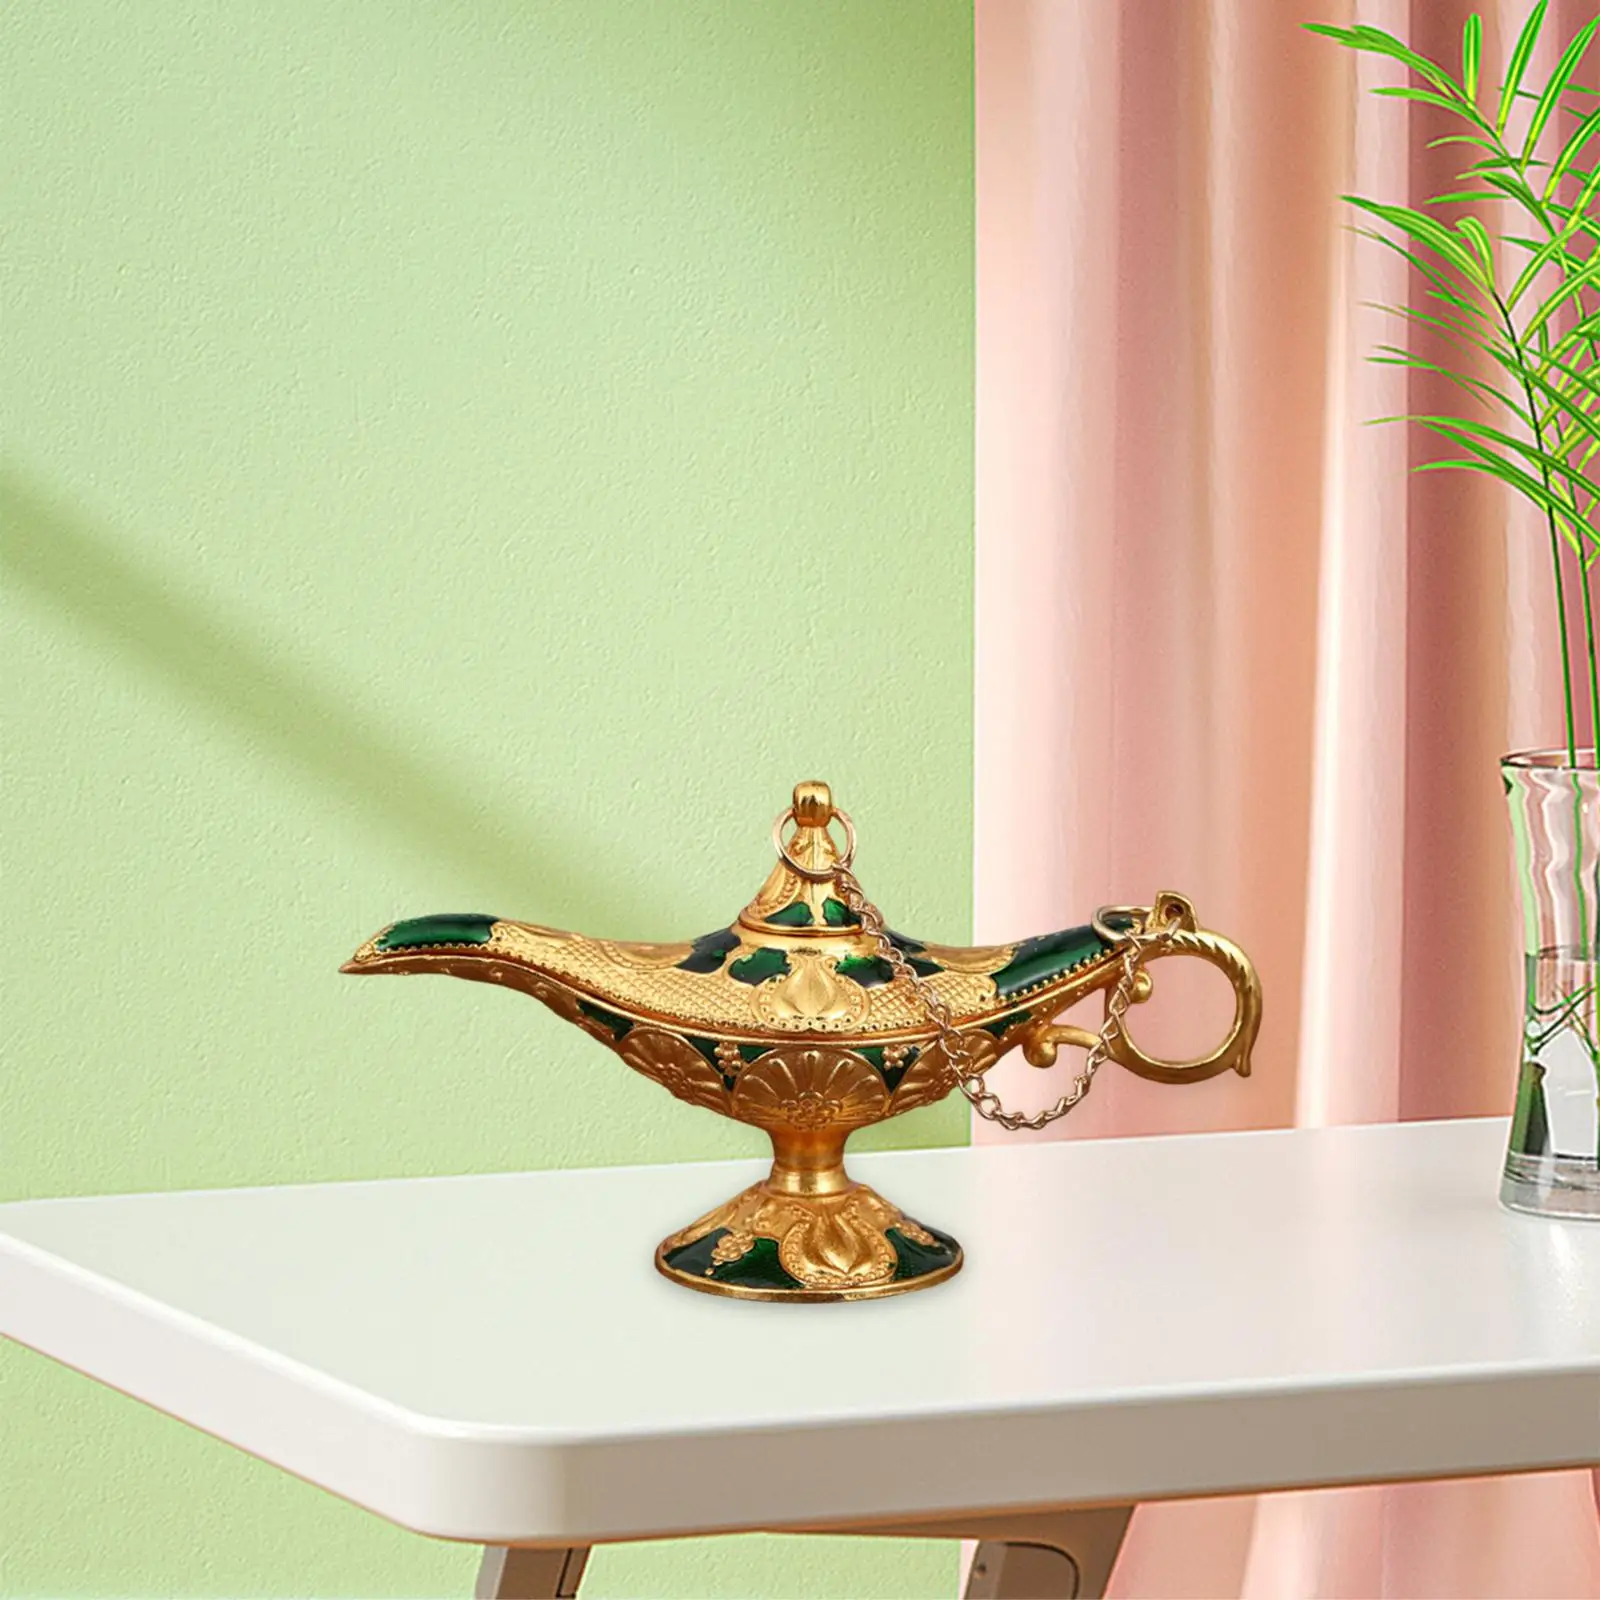 Magic Genie Lamp Decoration Ornament Crafts Luxury Classic for Table Wedding Bedroom Home Decor Party